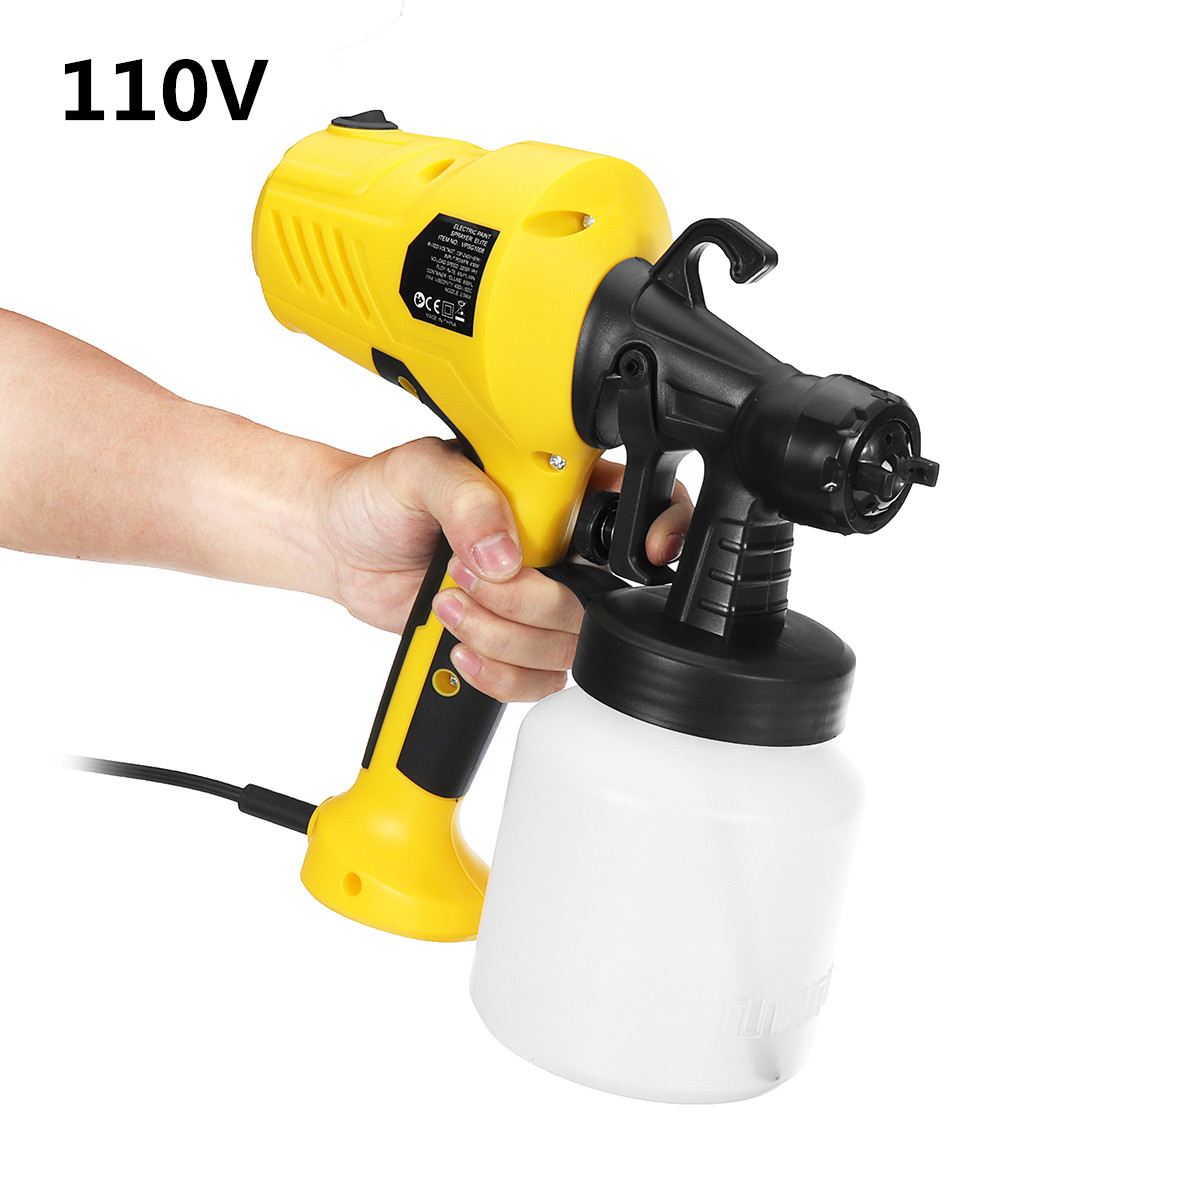 600W Electric Spray Paint Sprayer For Cars Wood Furniture Wall Woodworking 13